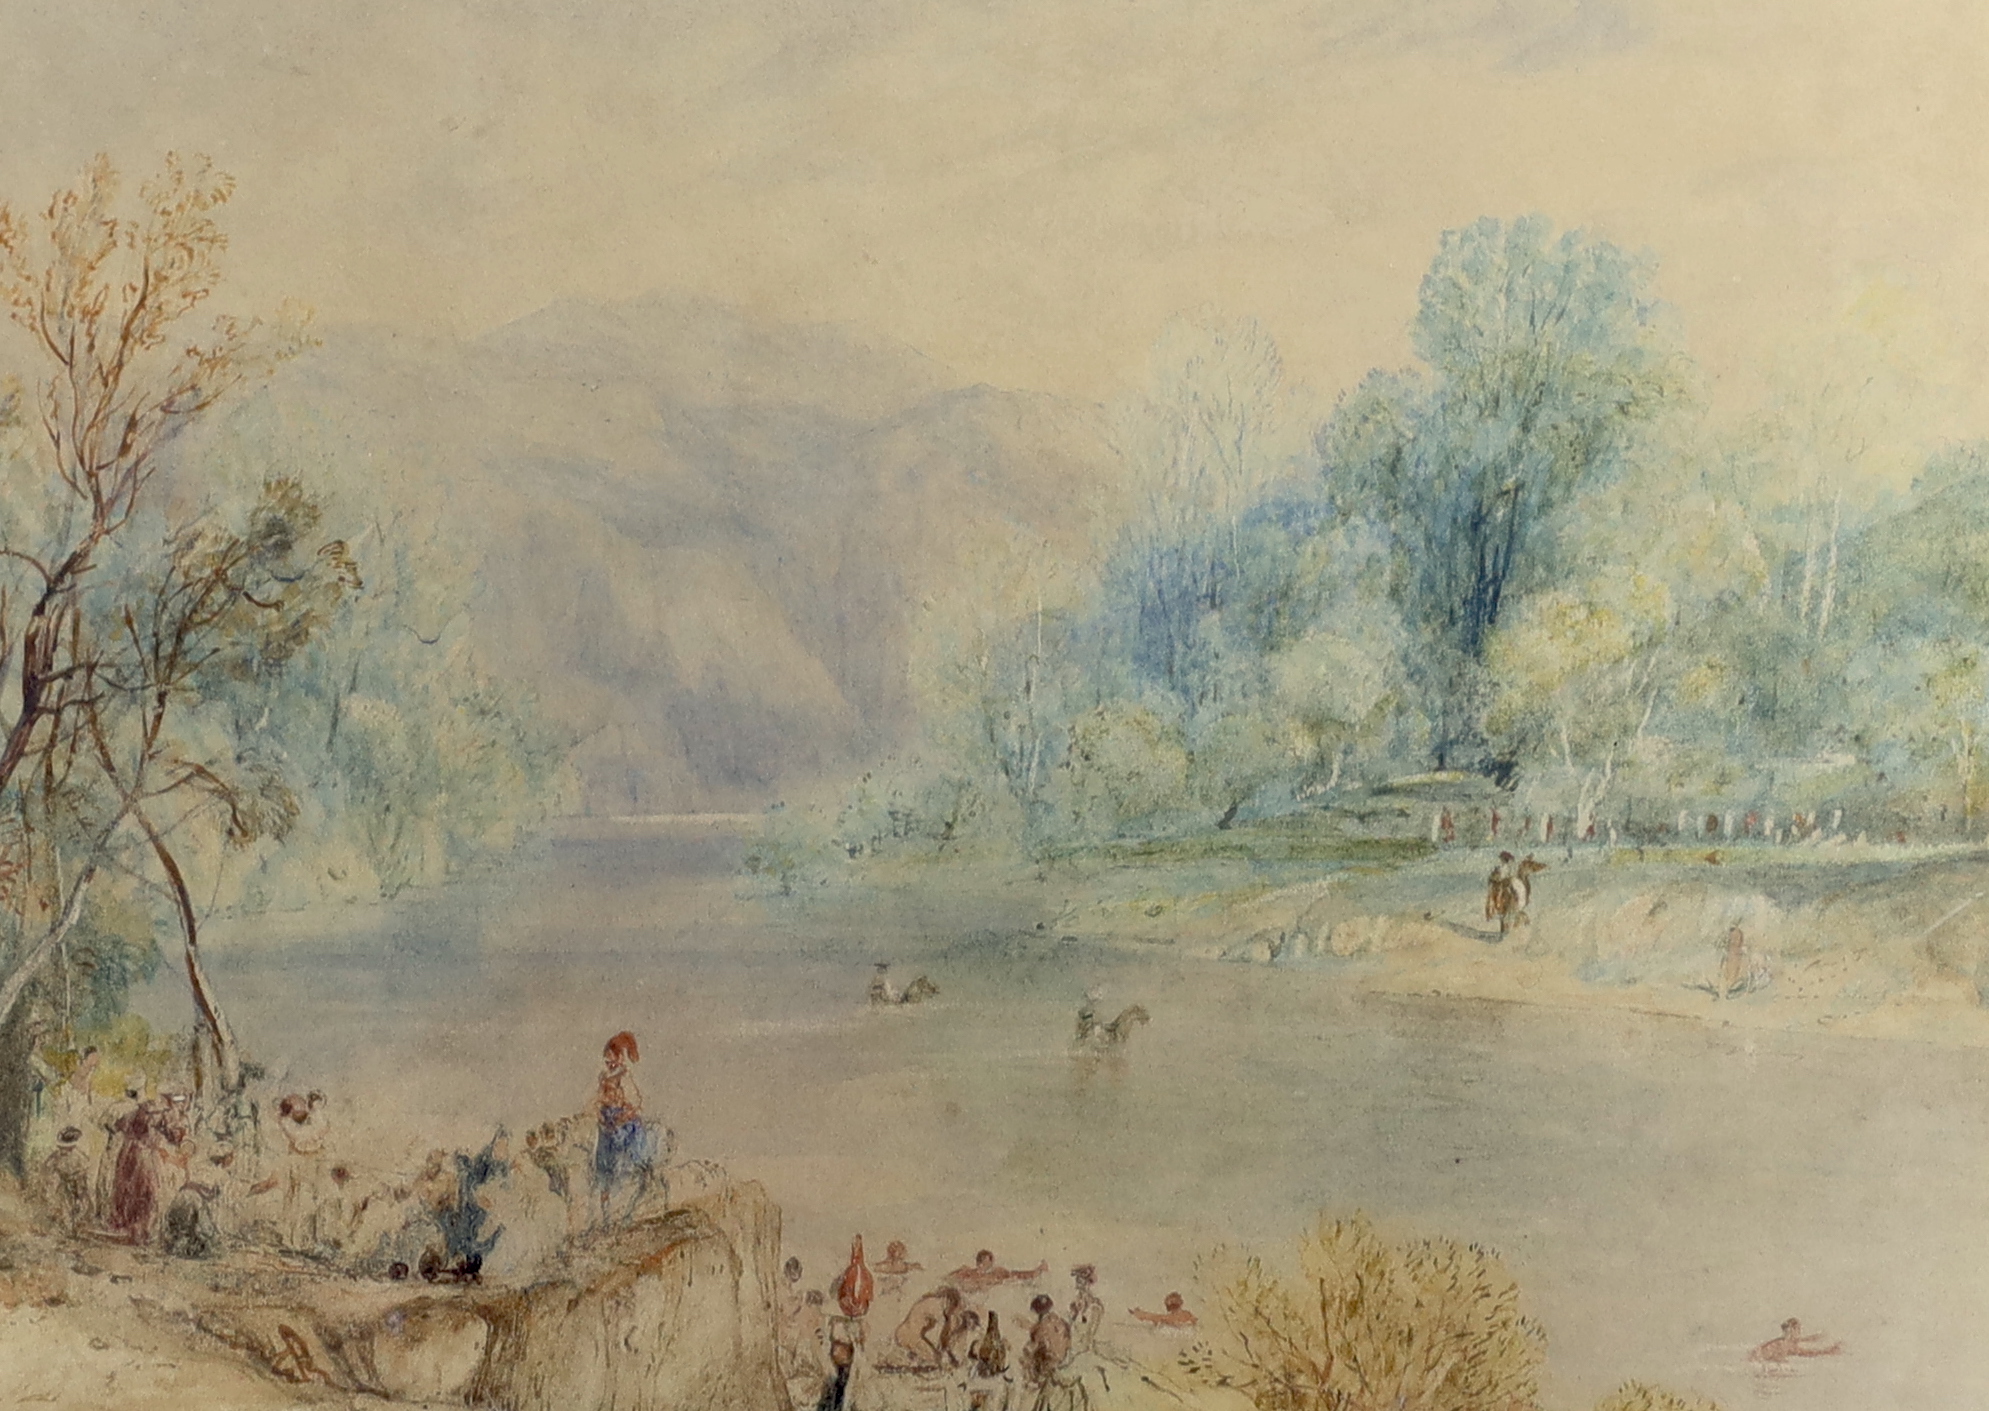 Augustus Wall Calcott RA (1779-1844), watercolour, ‘Fords of the Jordan’, inscribed to the mount, P & D Colnaghi & Co. label verso, 16 x 22cm                                                                               